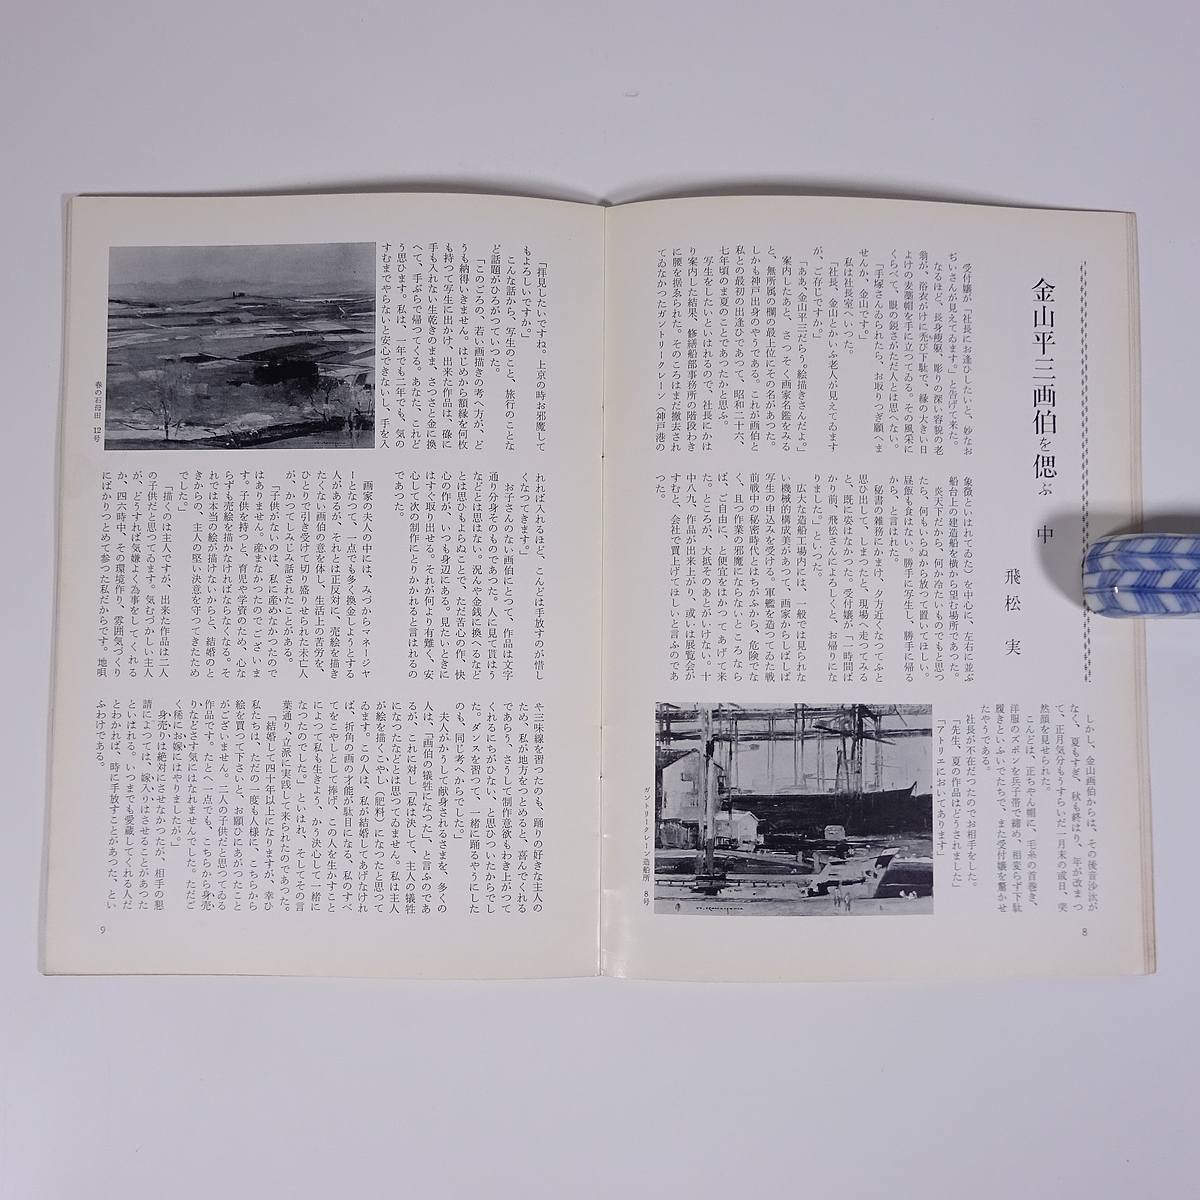  monthly magazine ..No.29 1966/7 day animation . small booklet art fine art picture special collection * sun exhibition south . see . Tsu scenery other manner earth . landscape painting another 